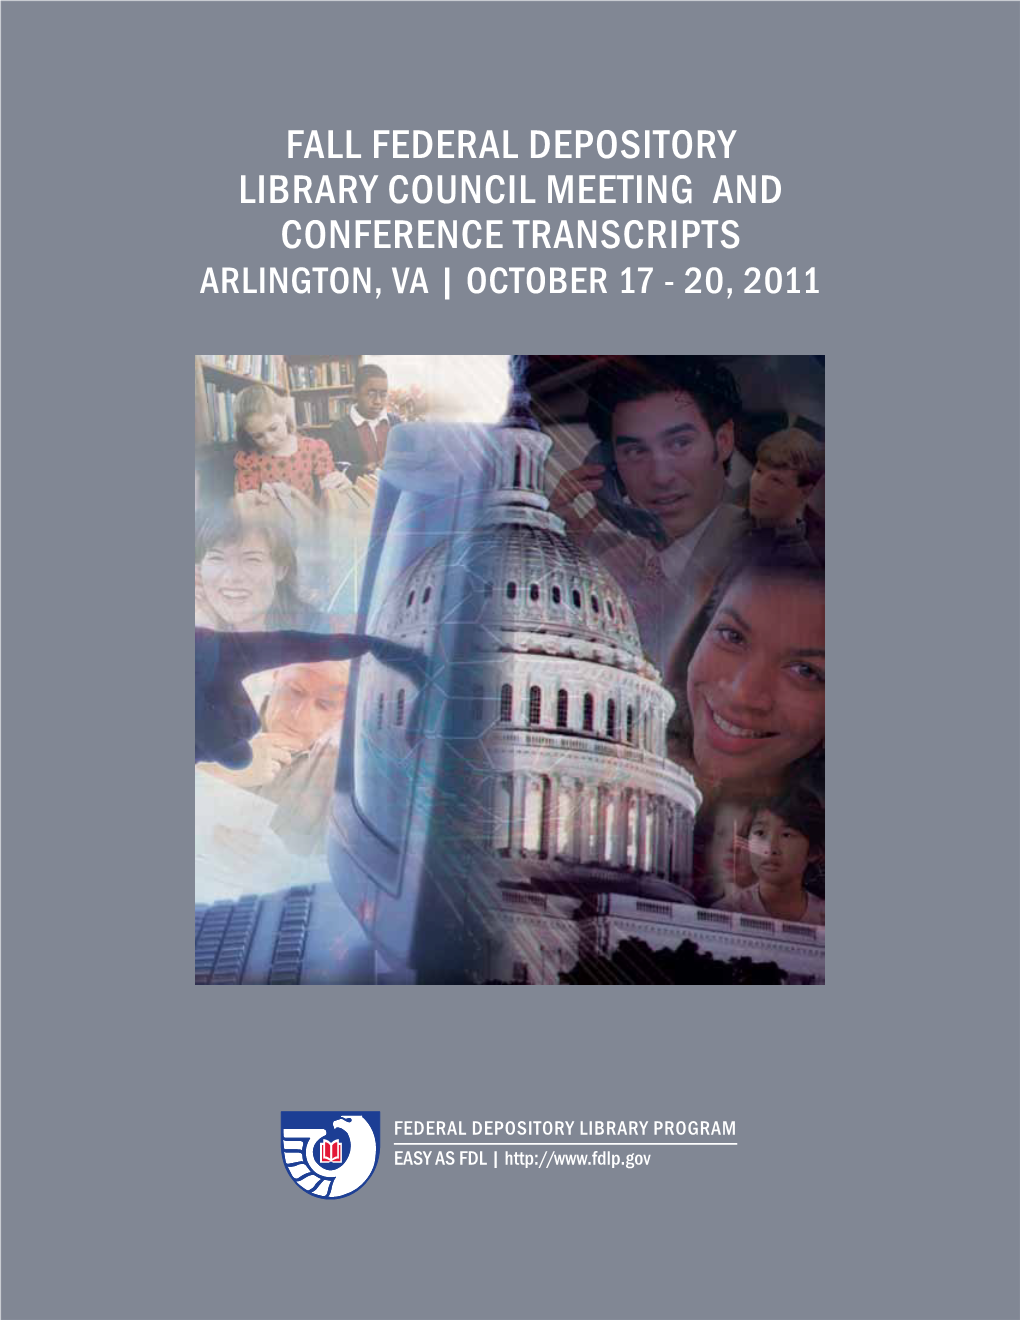 Fall Federal Depository Library Council Meeting and Conference Transcripts Arlington, Va | October 17 - 20, 2011